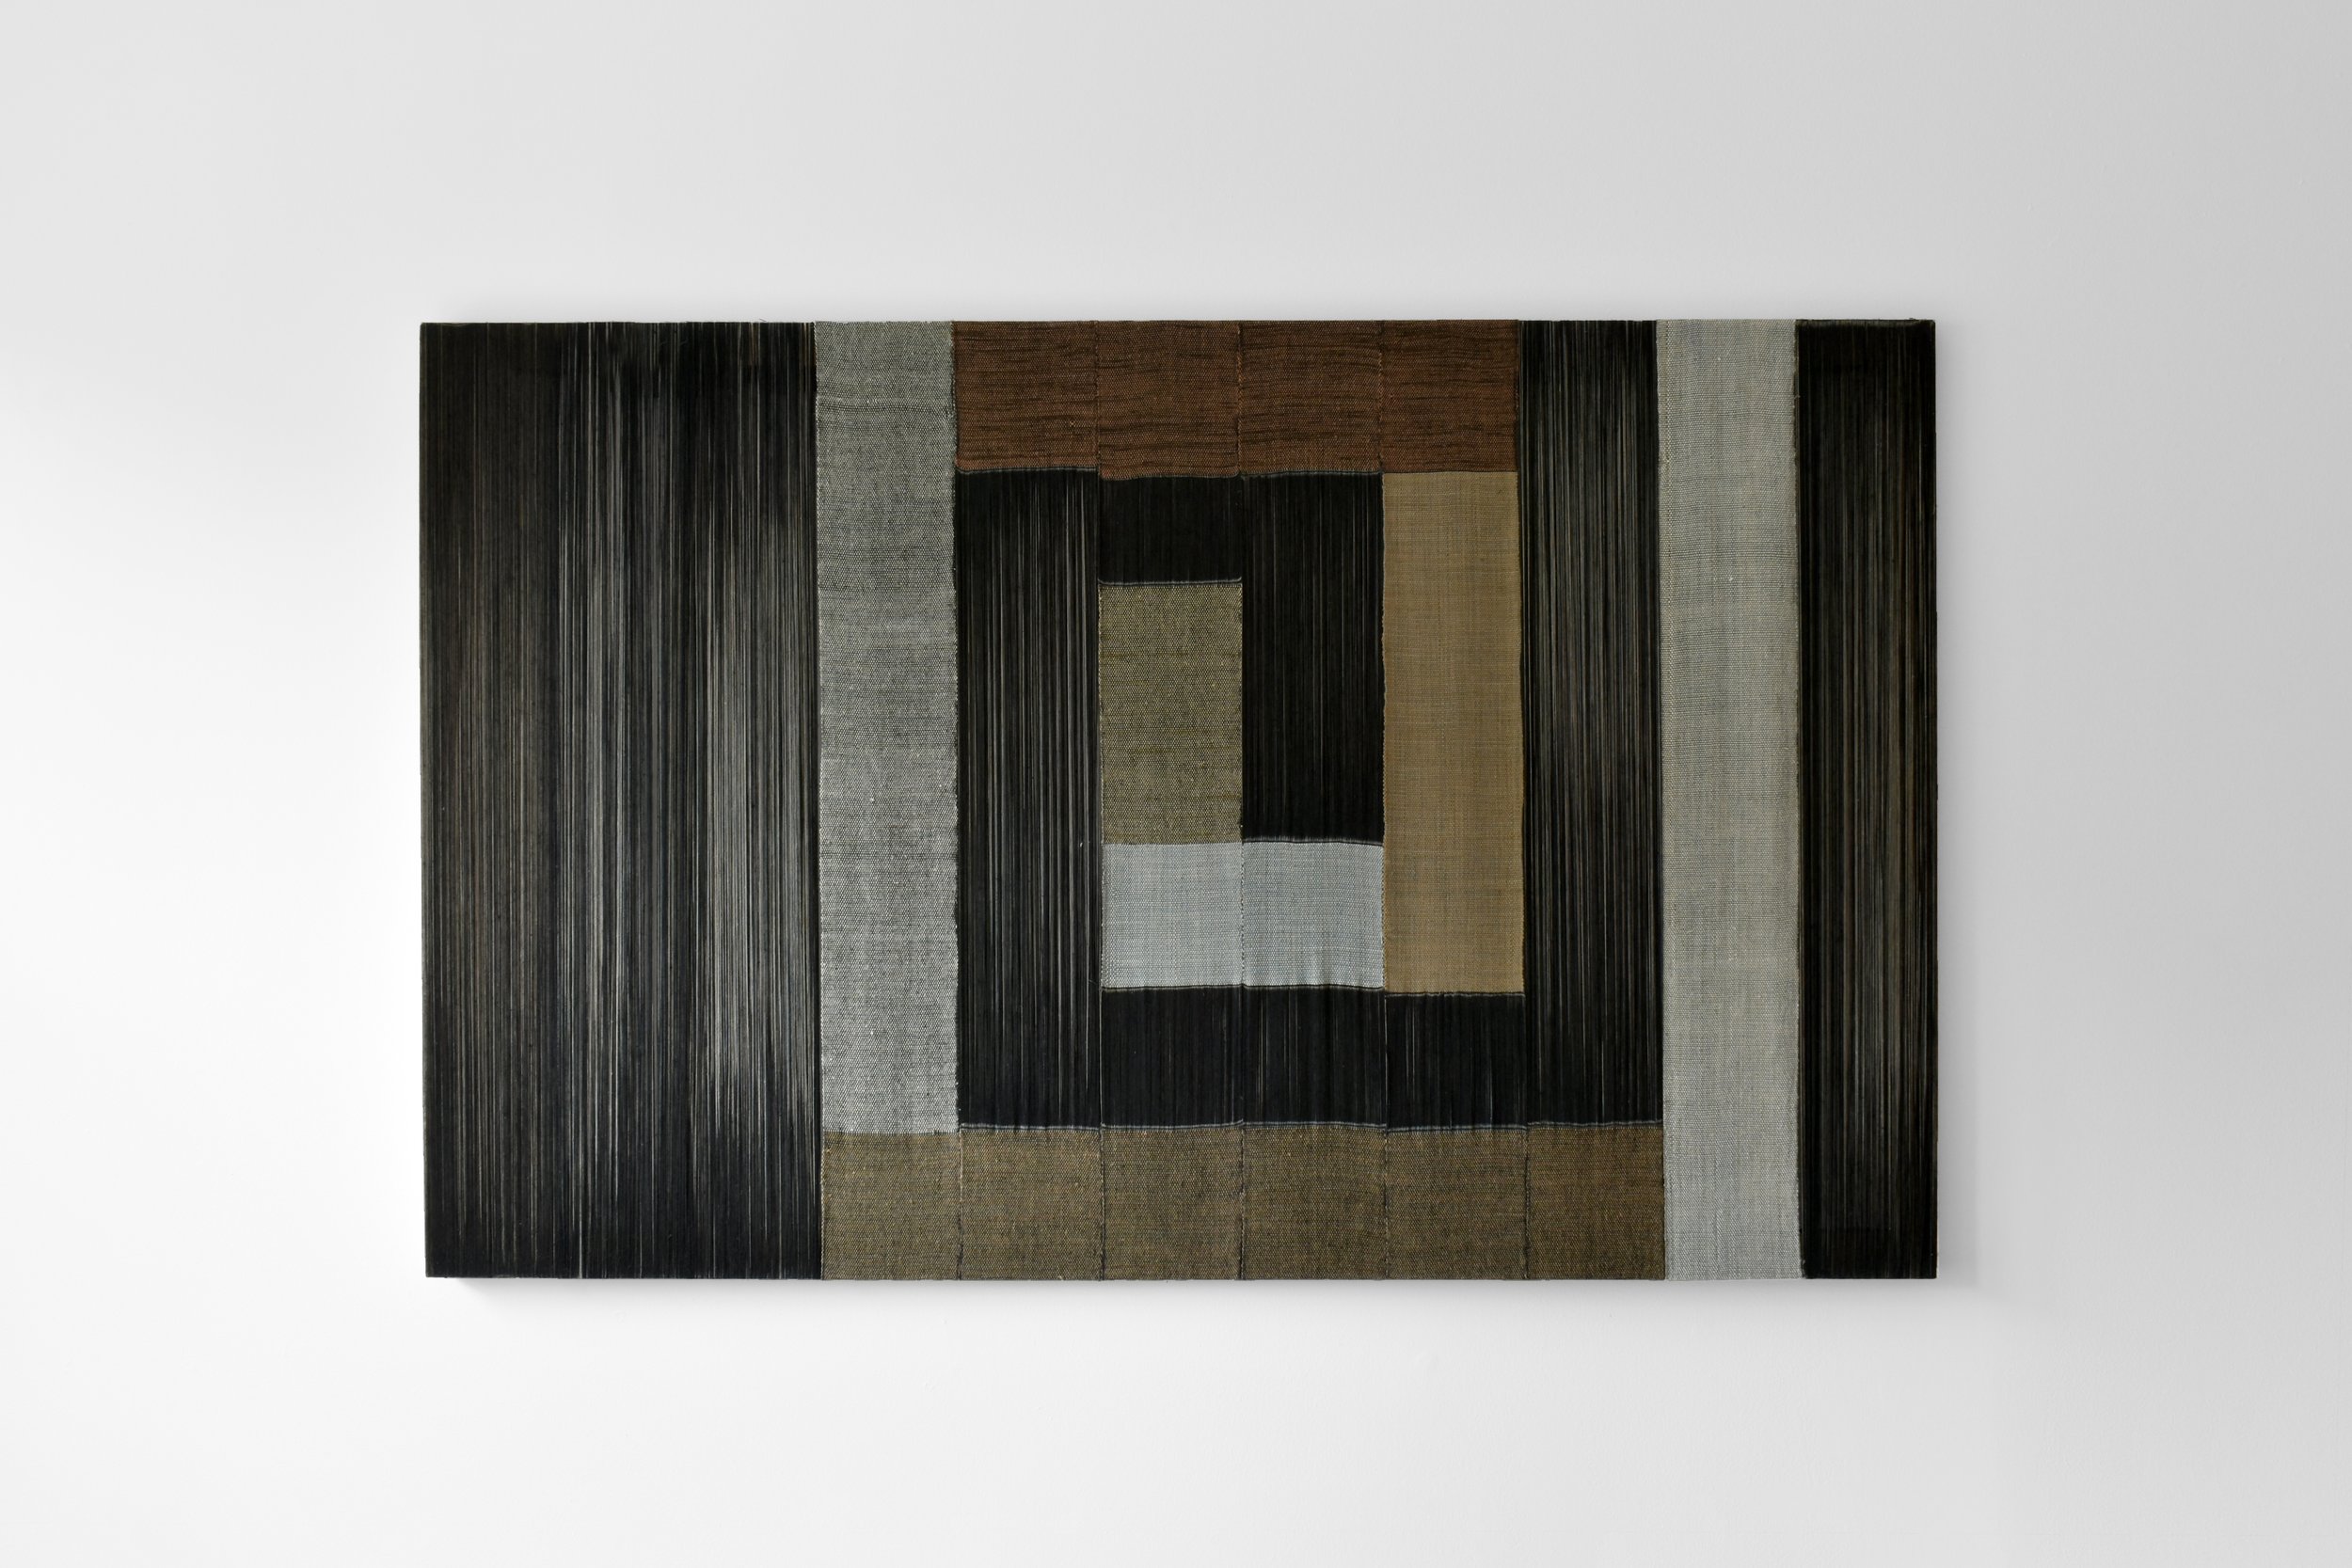   El Caracol   2022  linen, cotton and naturally dyed silks (Indigo, Fustic, Cutch)   57 x 36 inches 